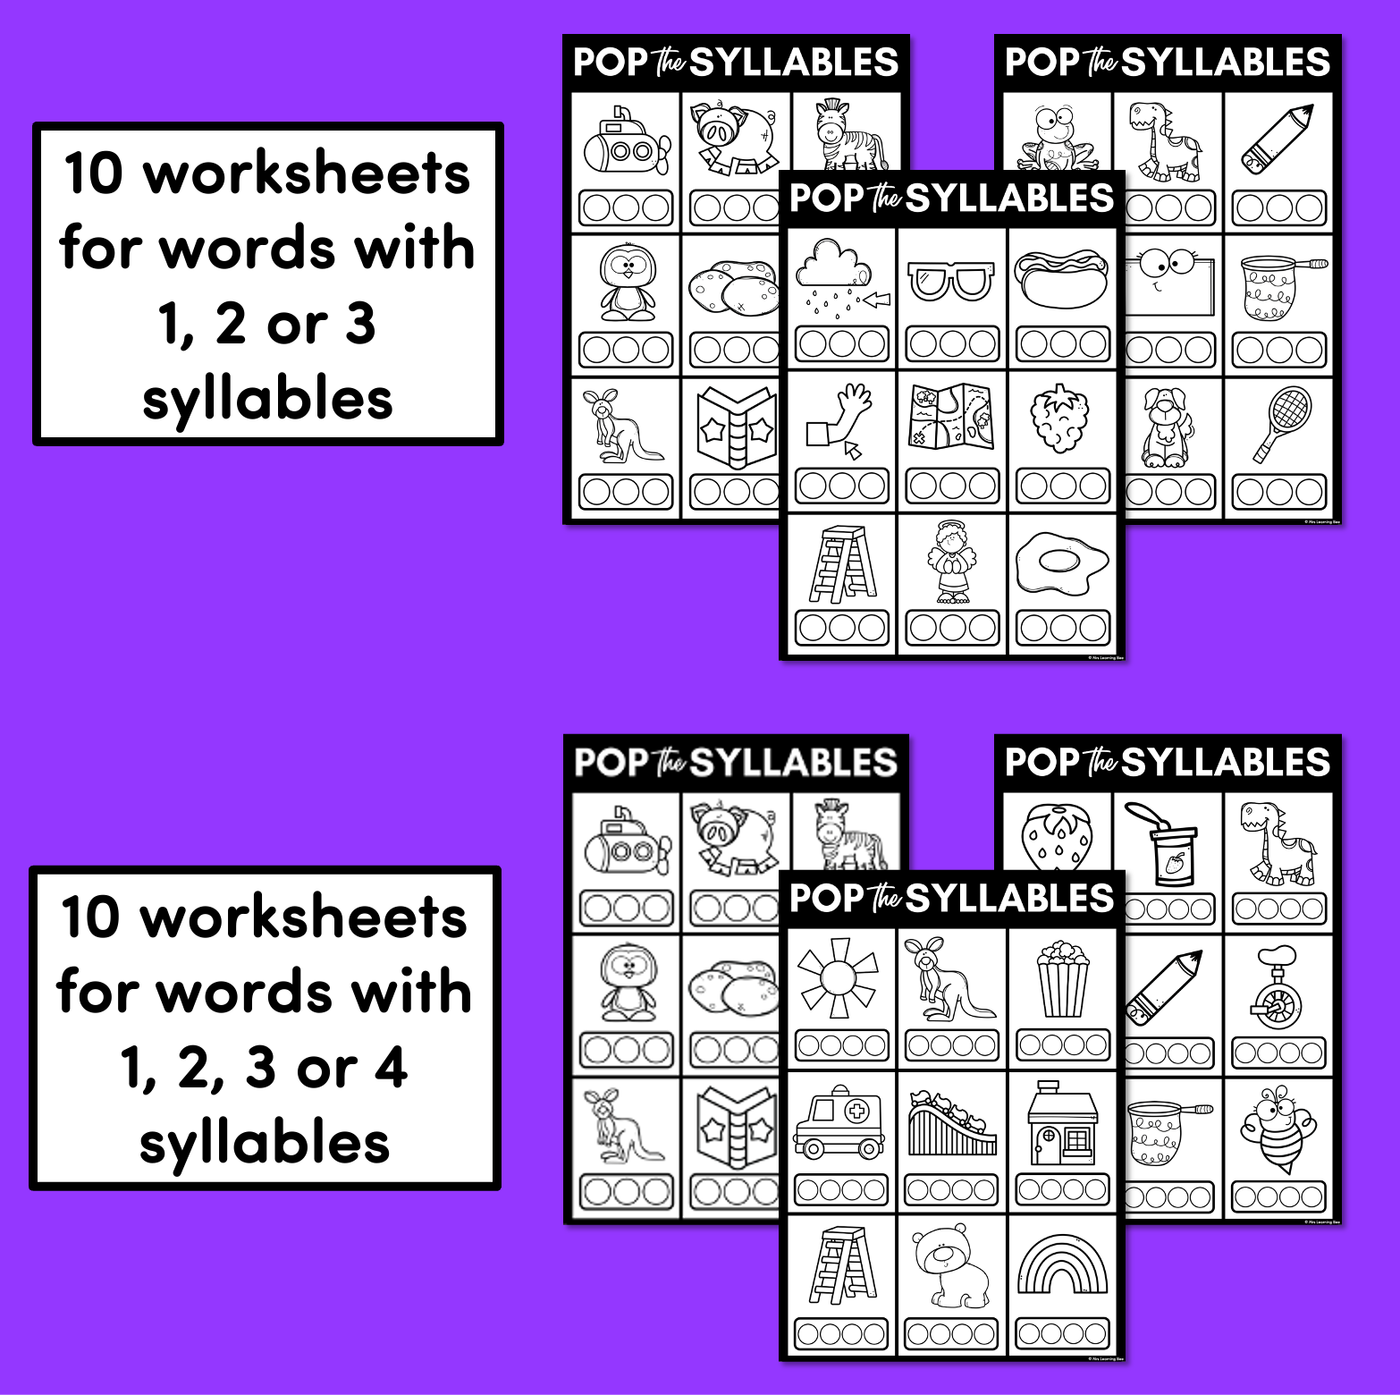 Syllable Poppit Worksheets - Words with 1, 2, 3 and 4 Syllables